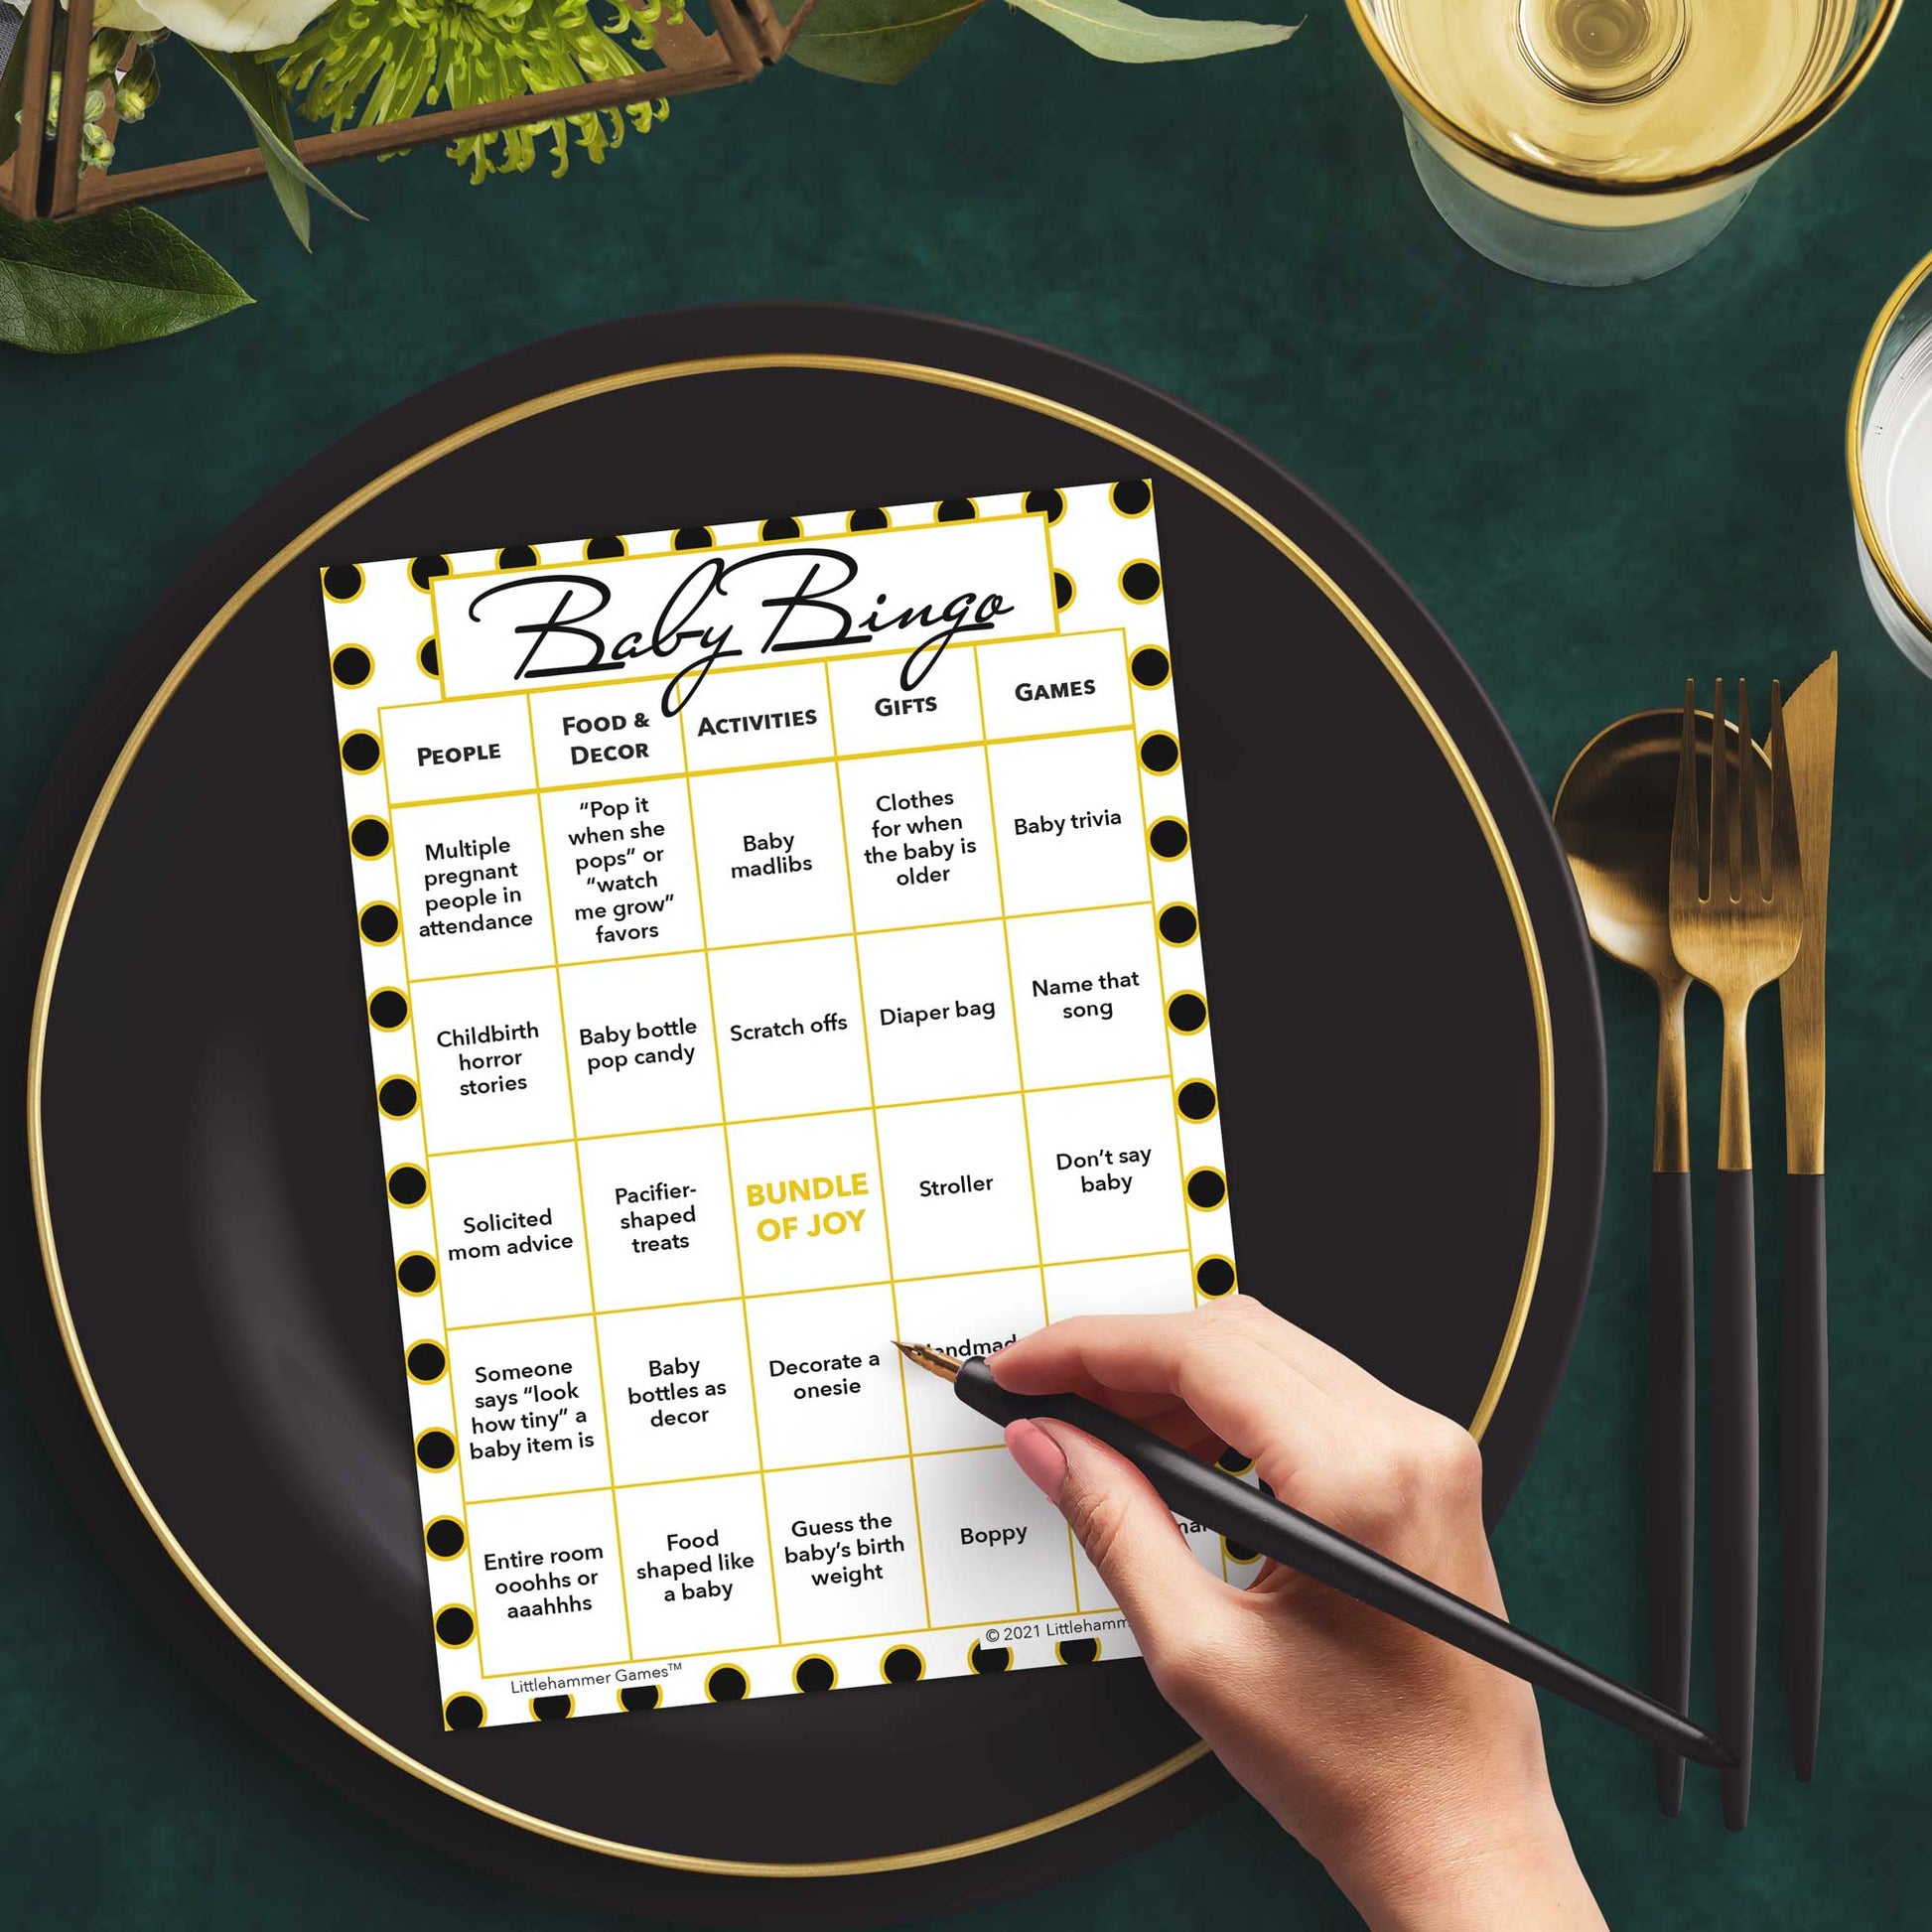 Woman with a pen sitting at a table with a black and gold polka dot Baby Bingo game card on a black and gold plate at a dark place setting